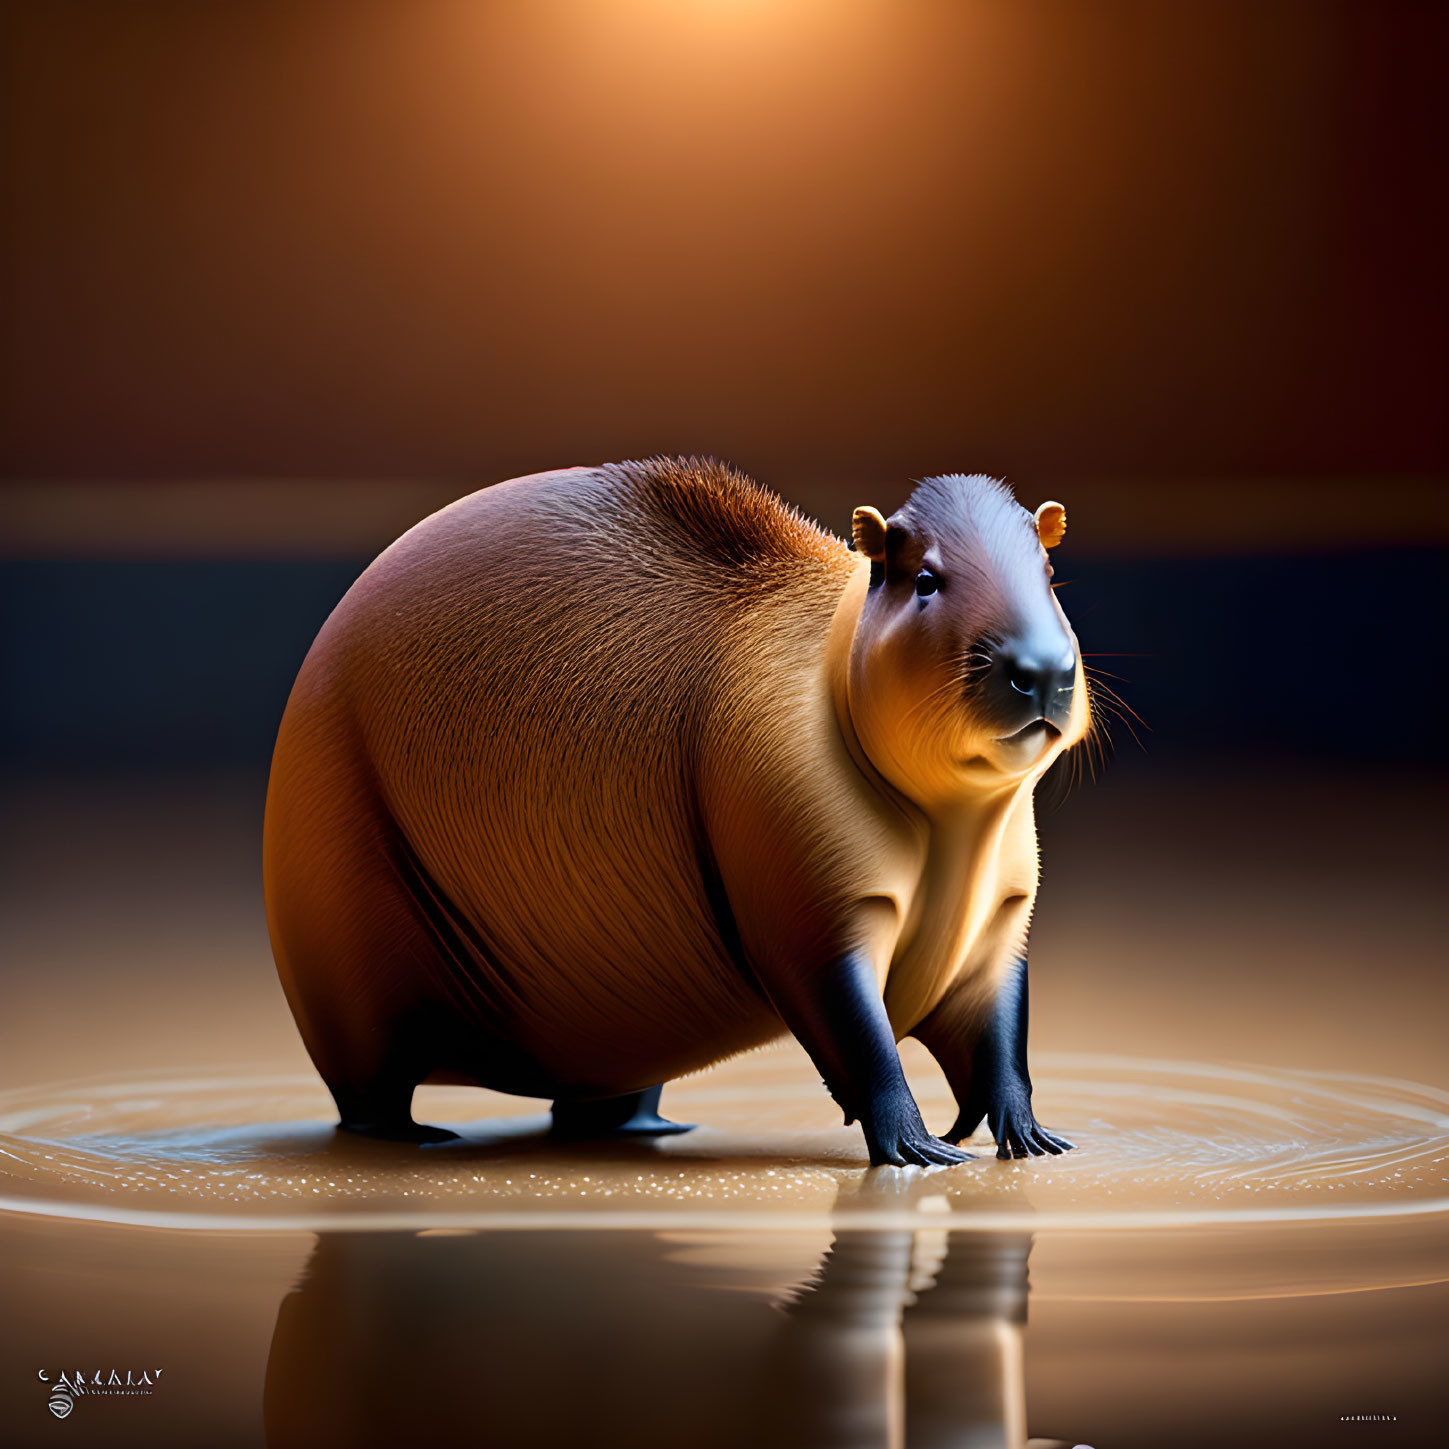 Stylized digital artwork of oversized capybara with exaggerated proportions